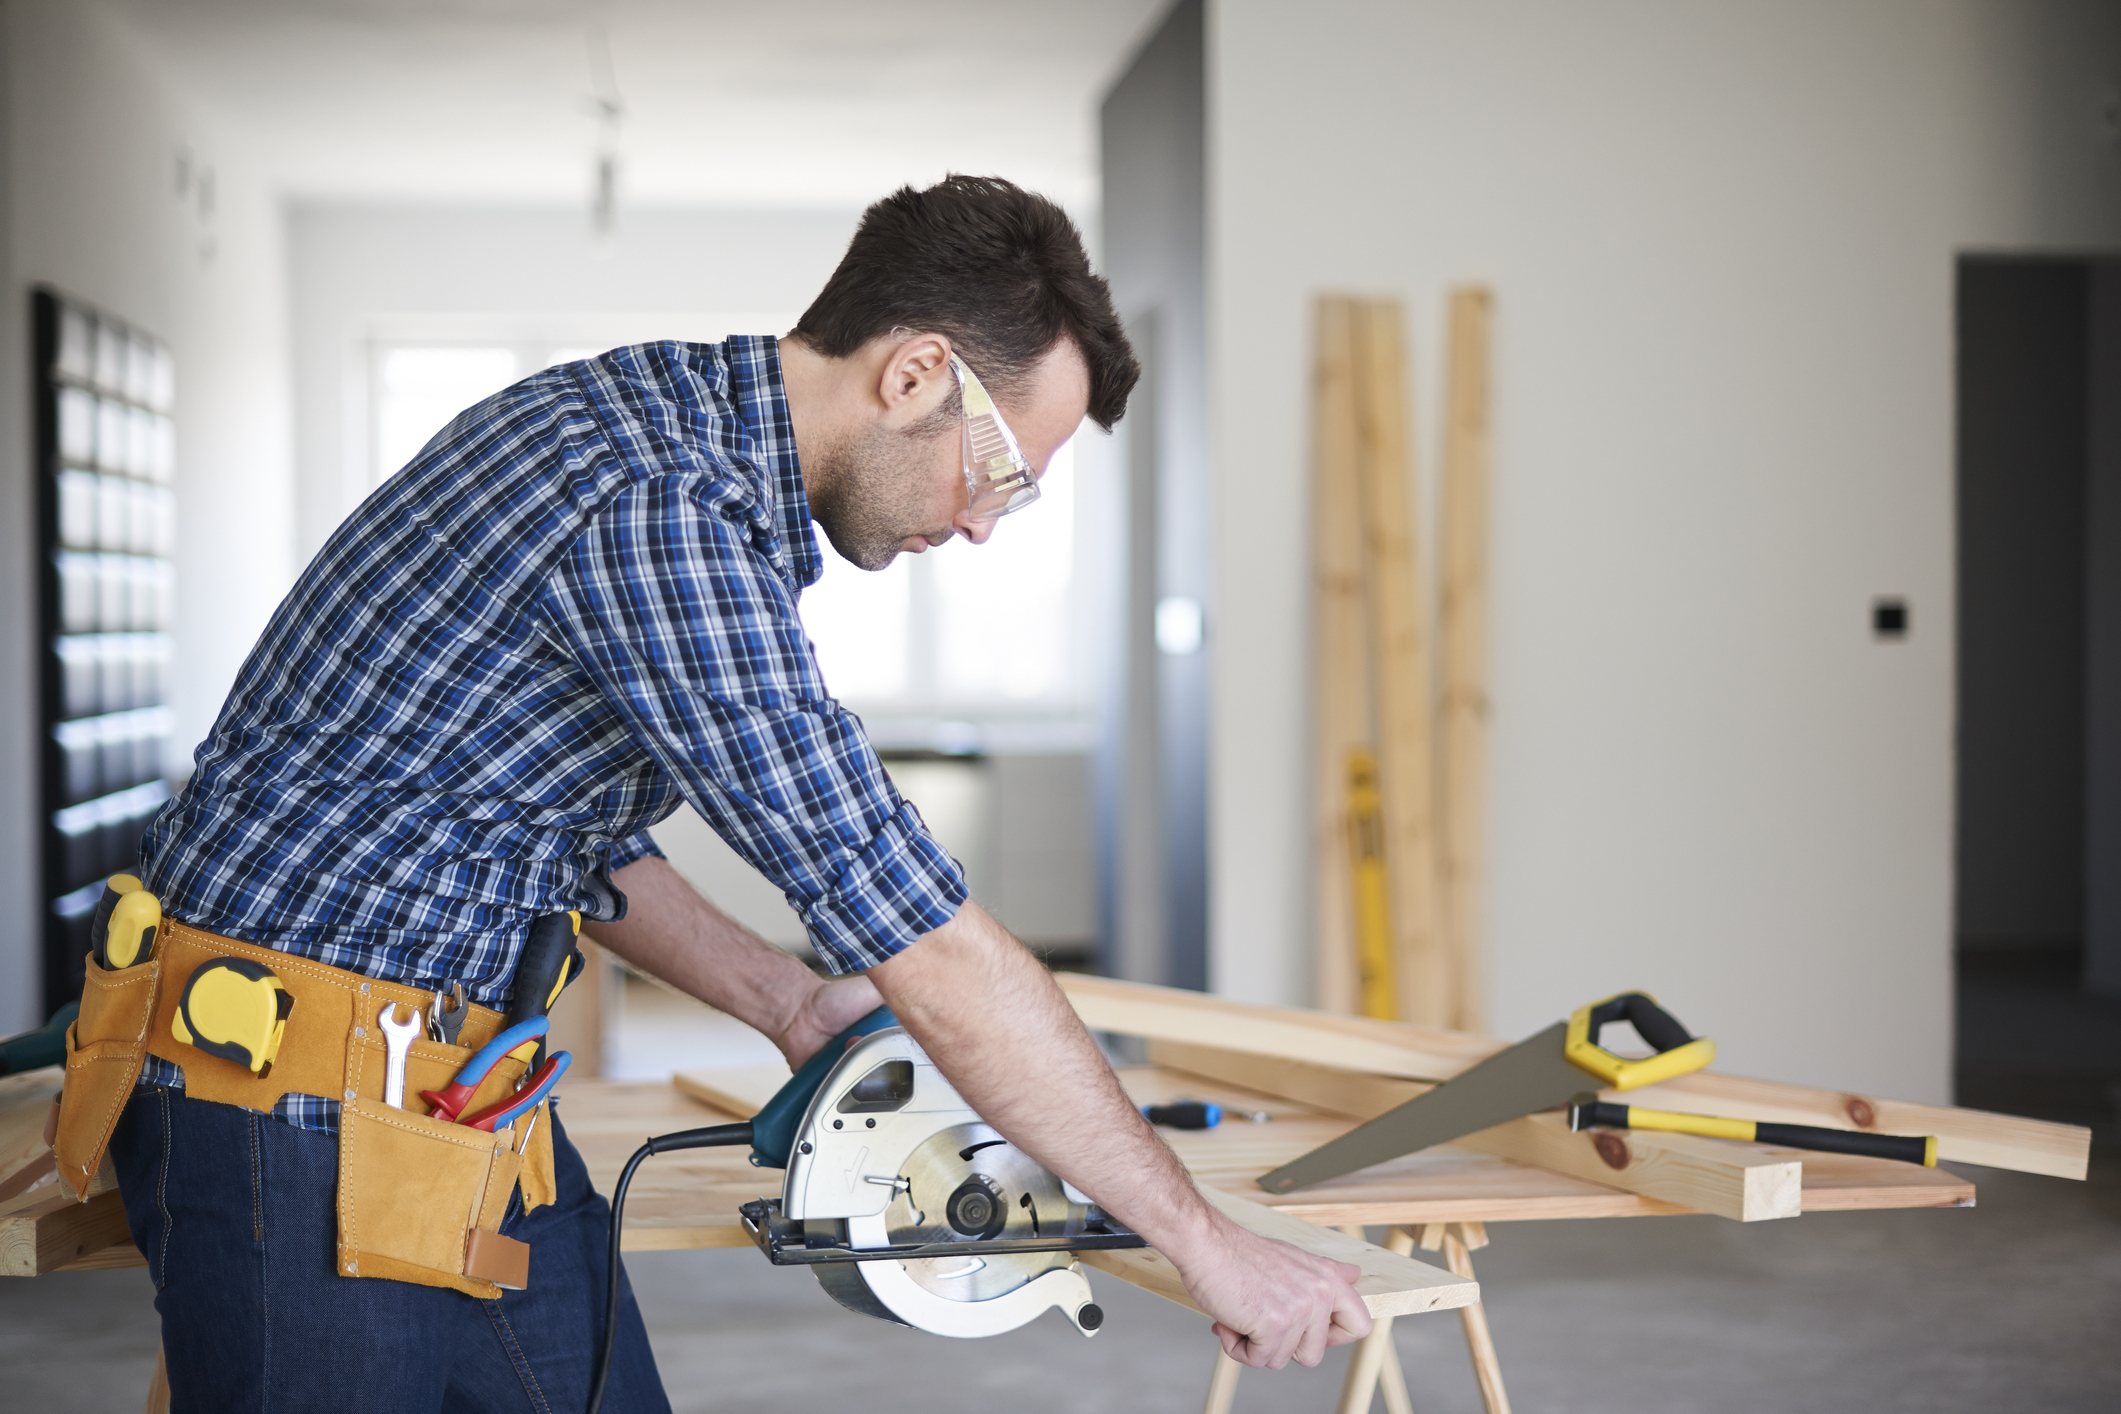 Construction worker or contractor using a saw